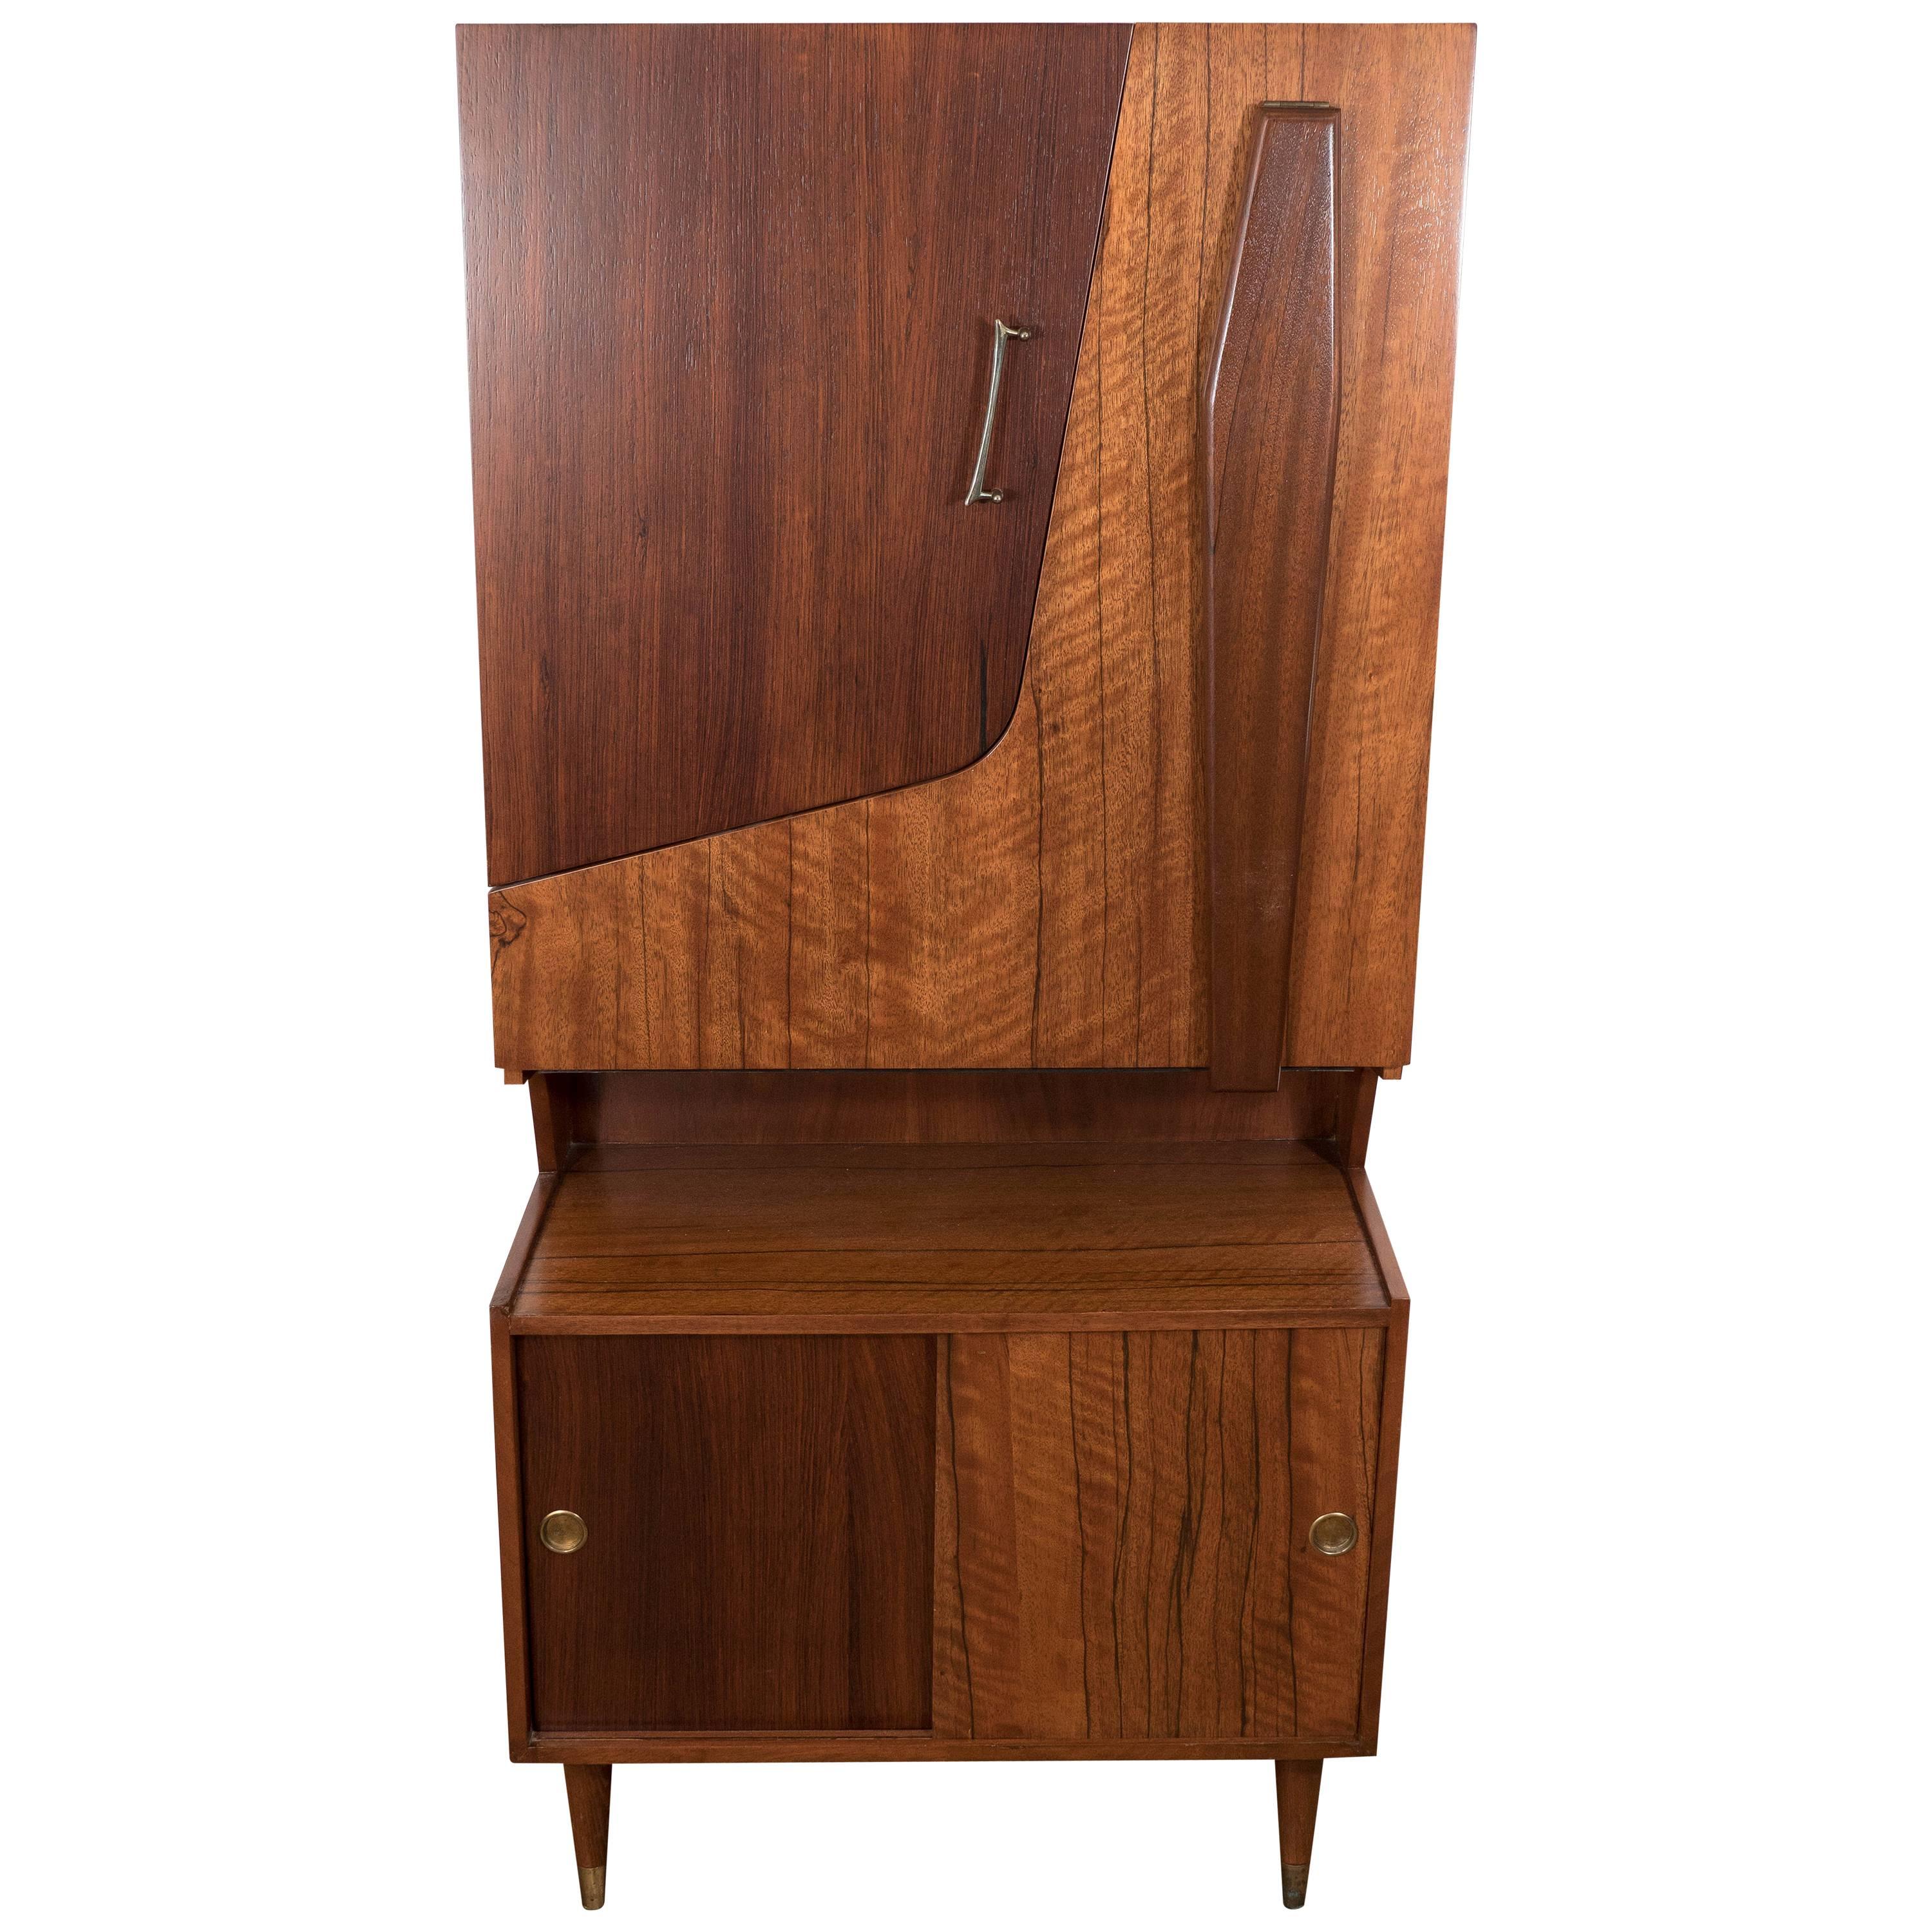 Midcentury Modern Two Tone Wood Bar and Liquor Cabinet